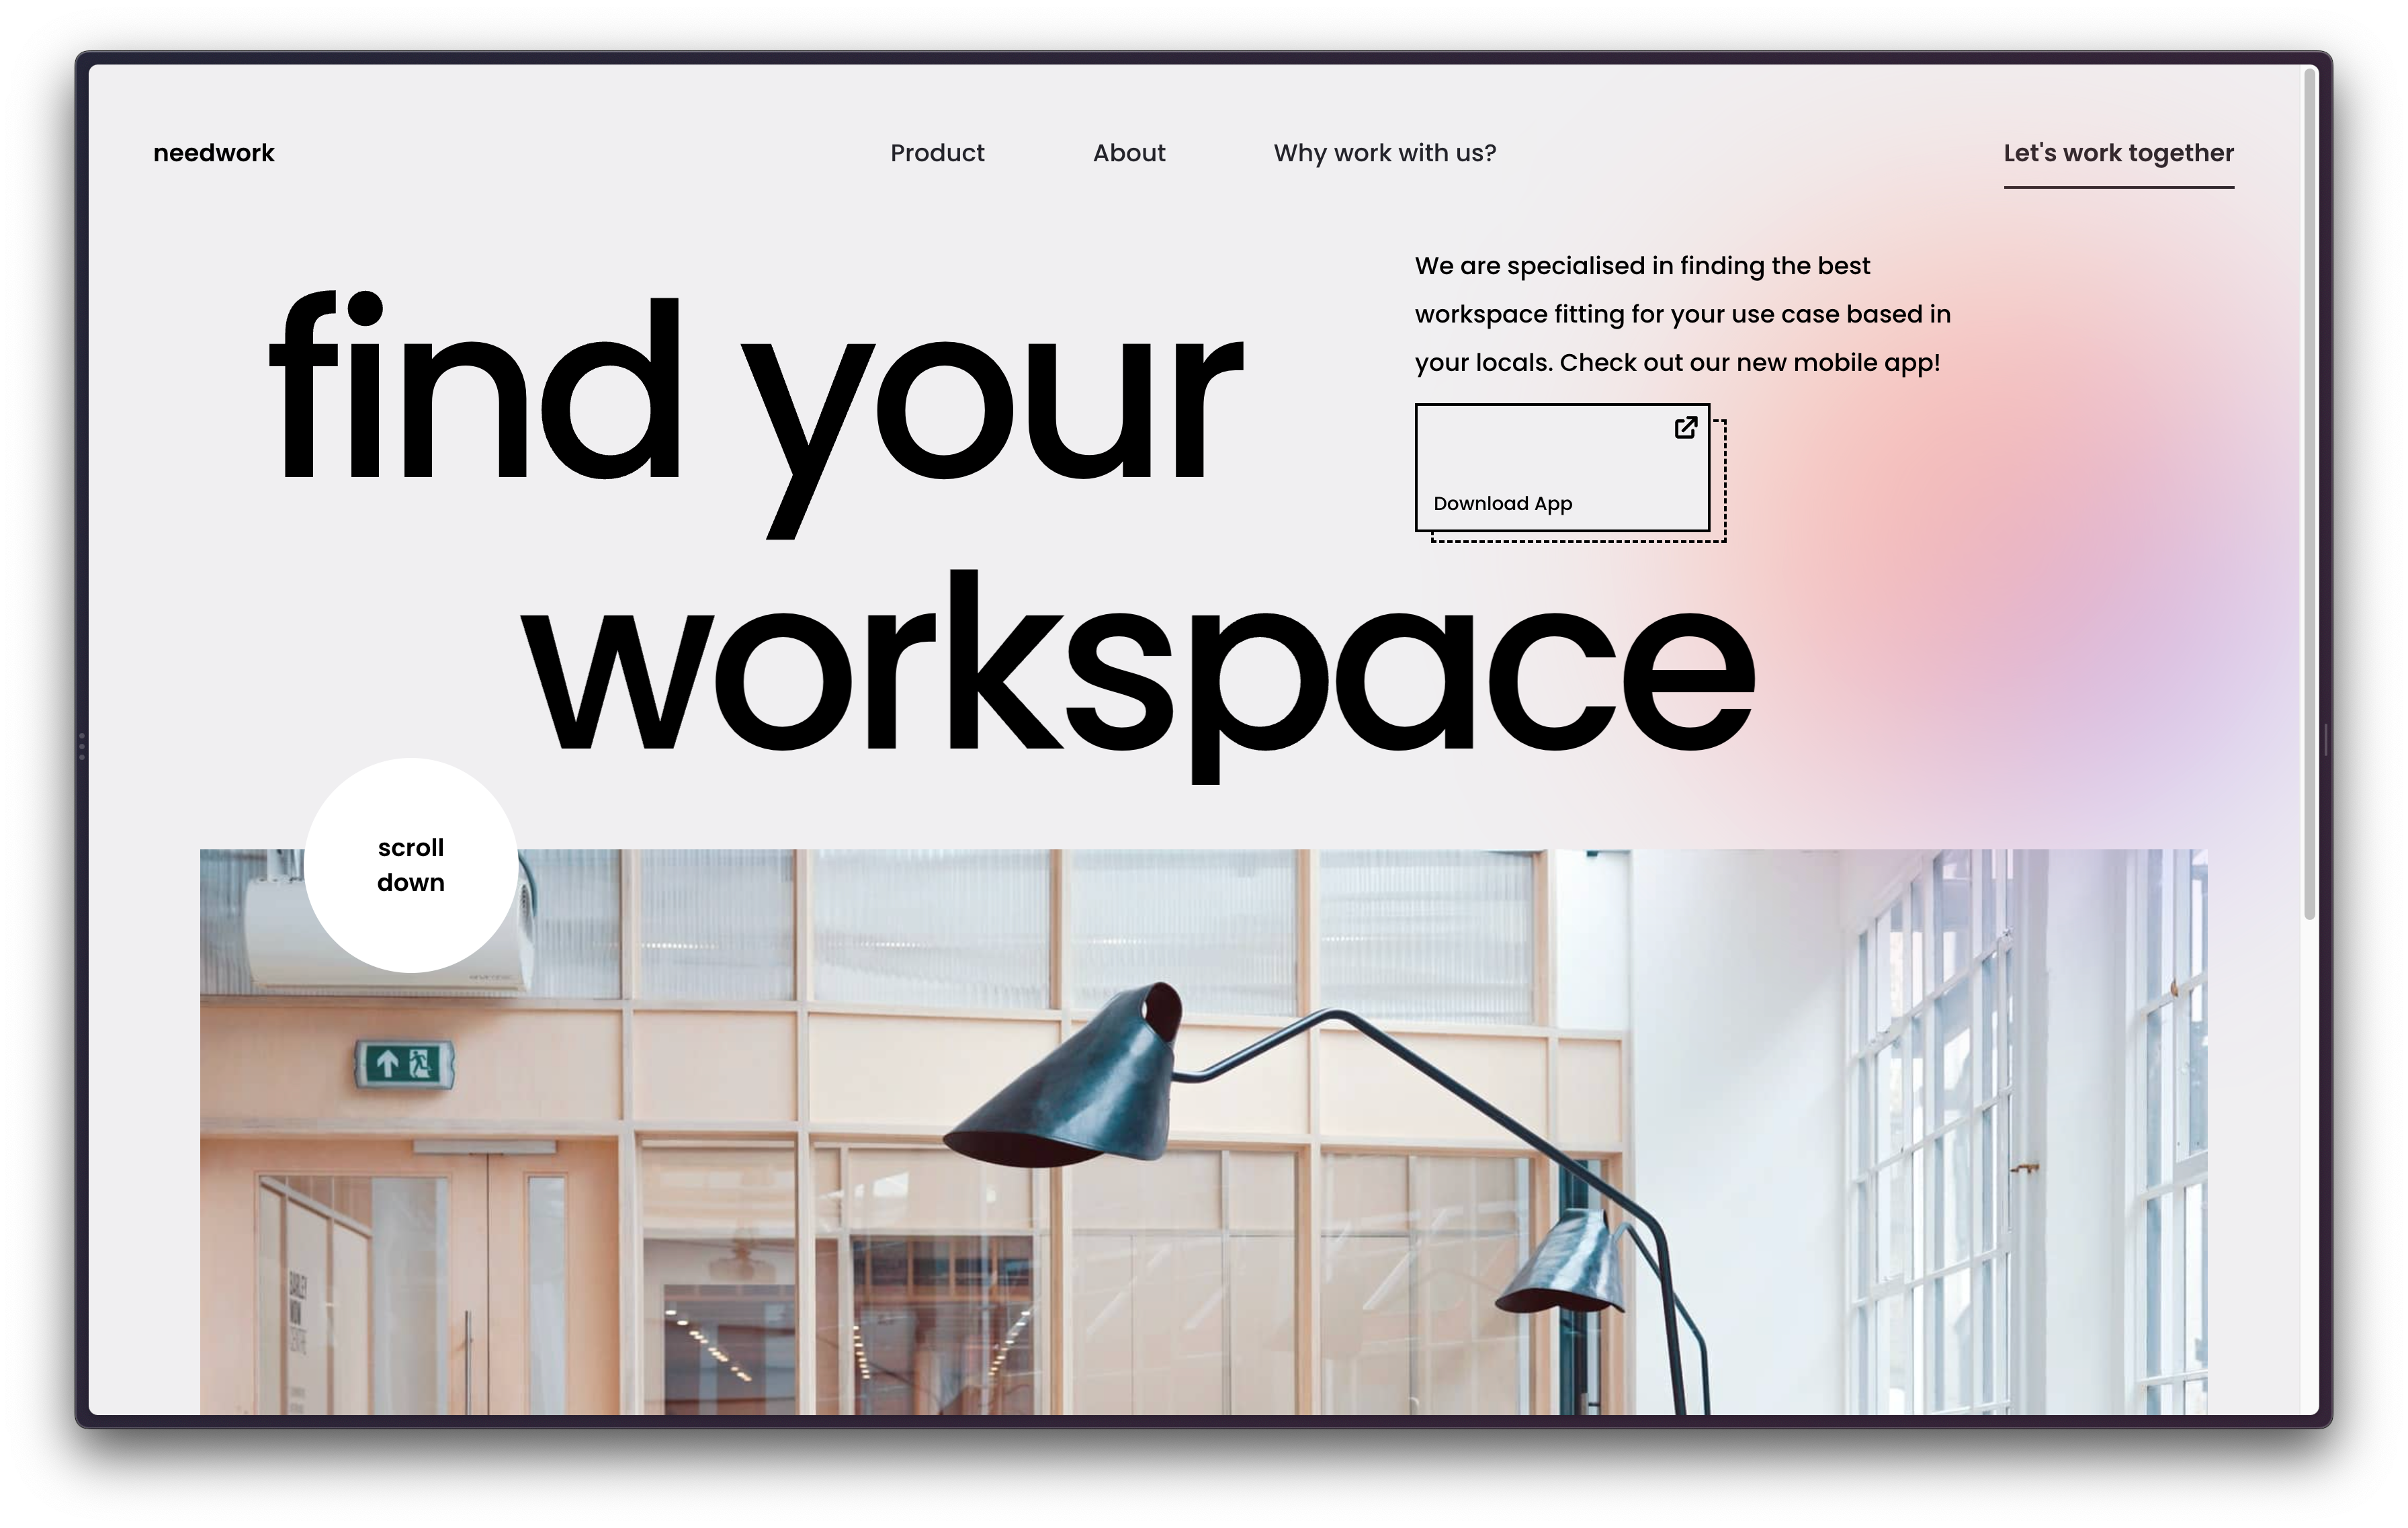 Preview of needwork's landing page